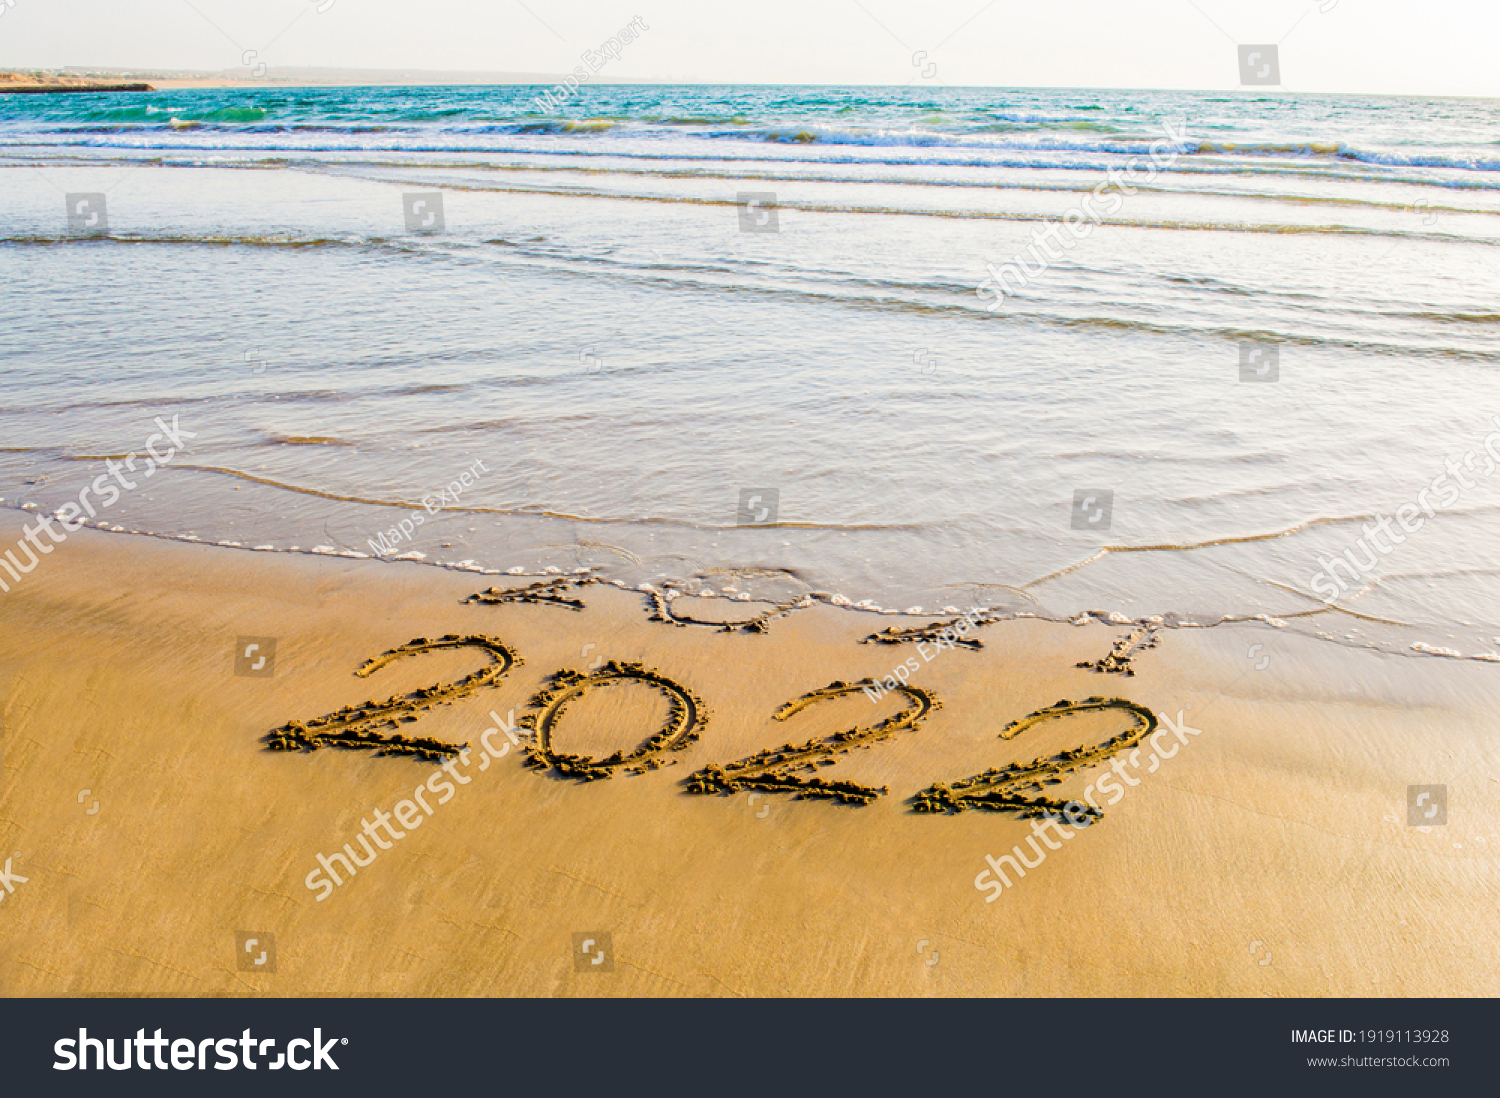 Happy New Year 2022 text on the sea beach. Abstract background photo of coming New Year 2022 and leaving year of 2021 #1919113928